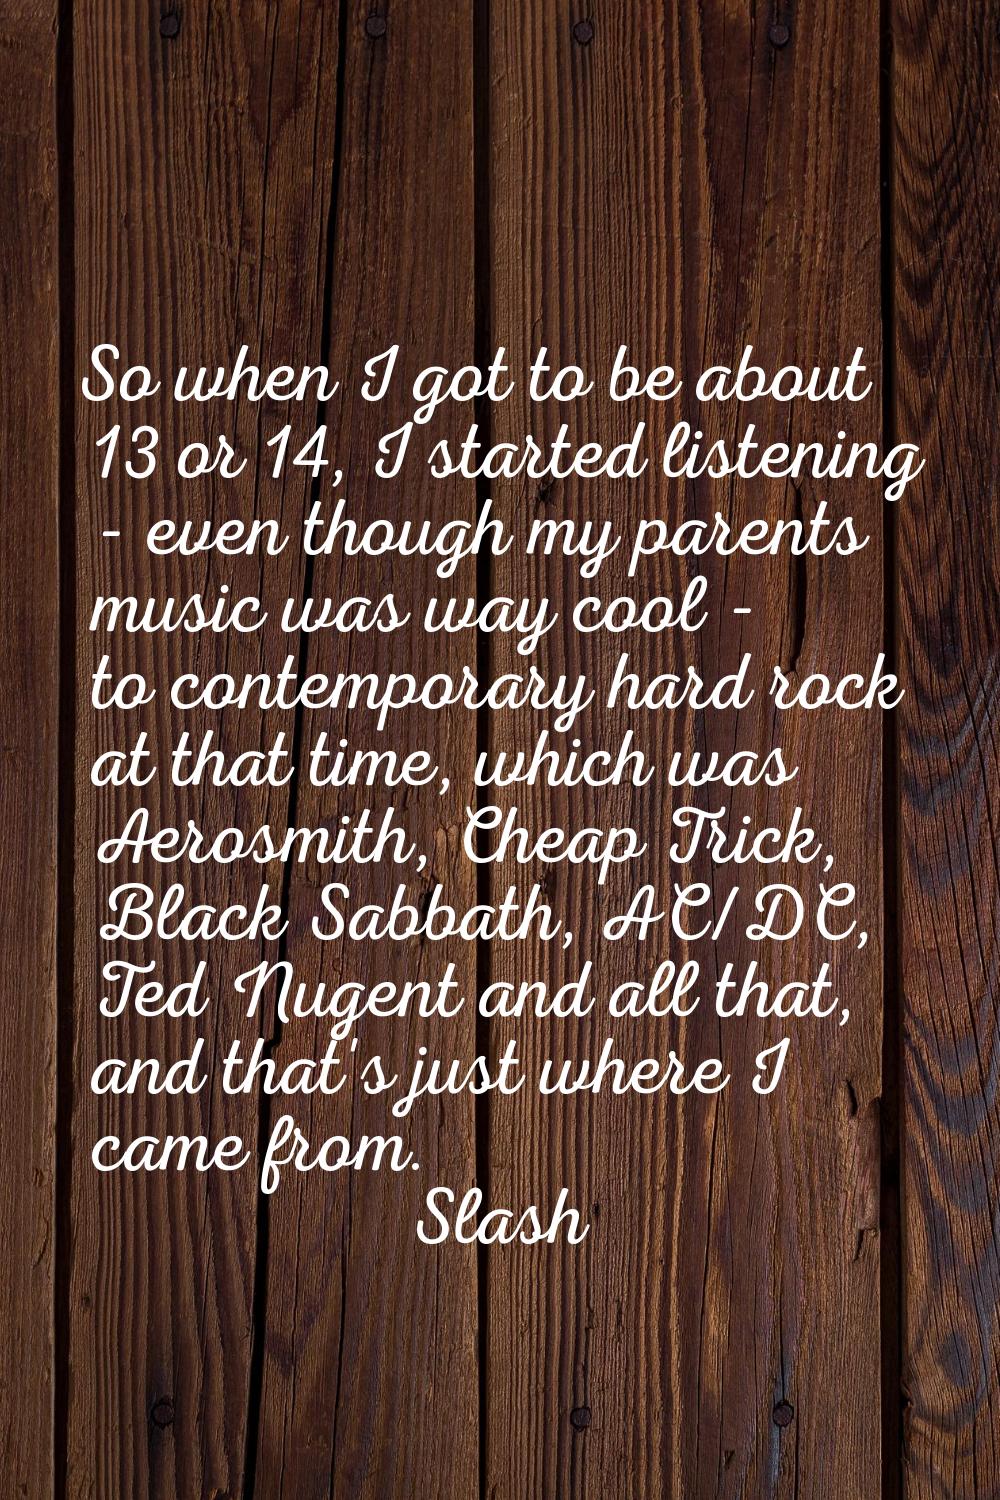 So when I got to be about 13 or 14, I started listening - even though my parents music was way cool